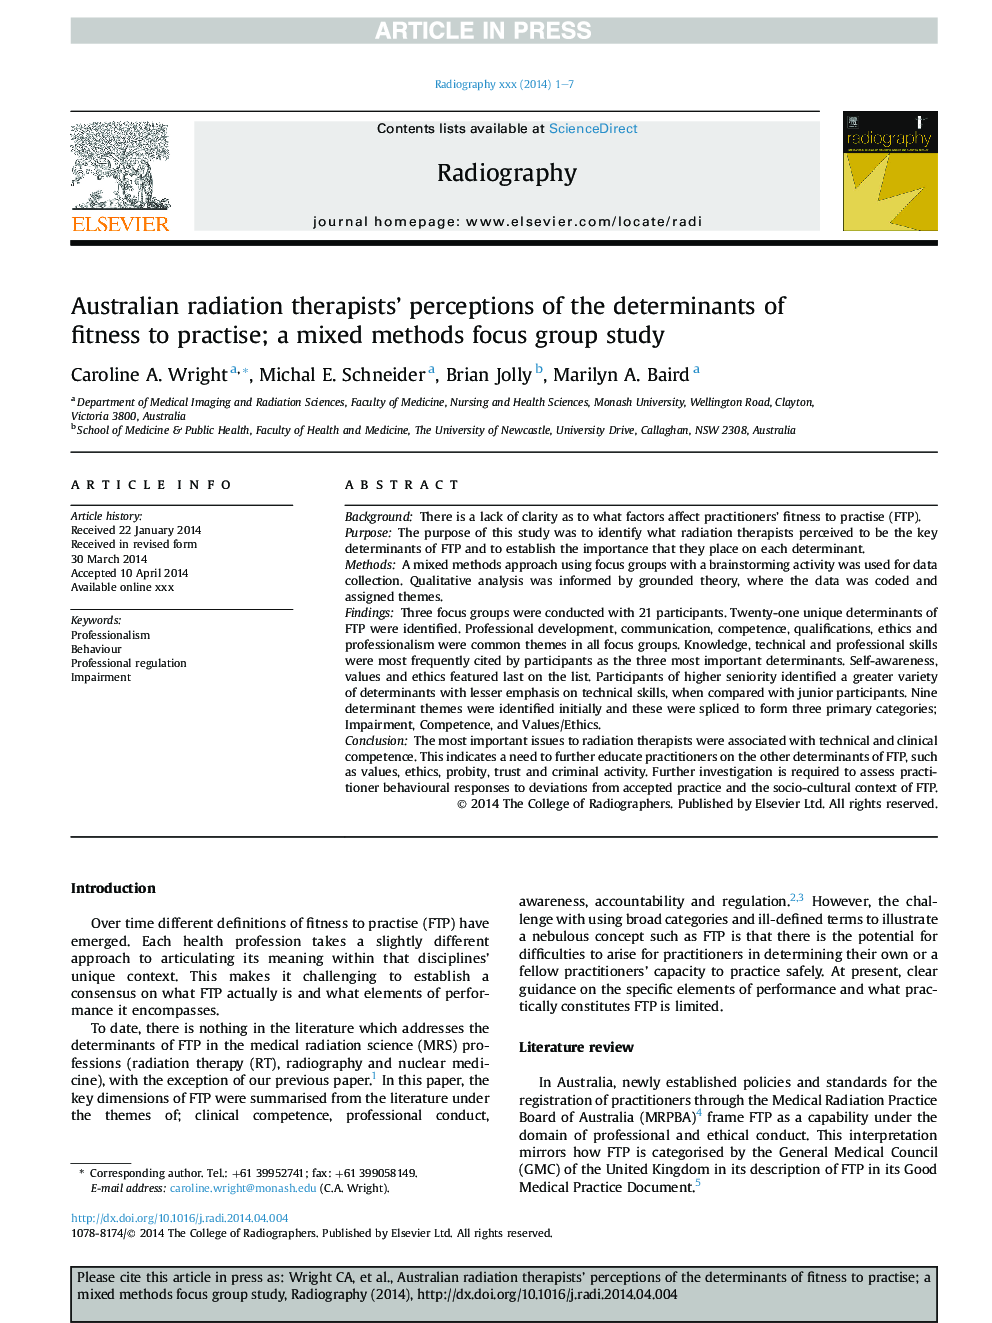 Australian radiation therapists' perceptions of the determinants of fitness to practise; a mixed methods focus group study